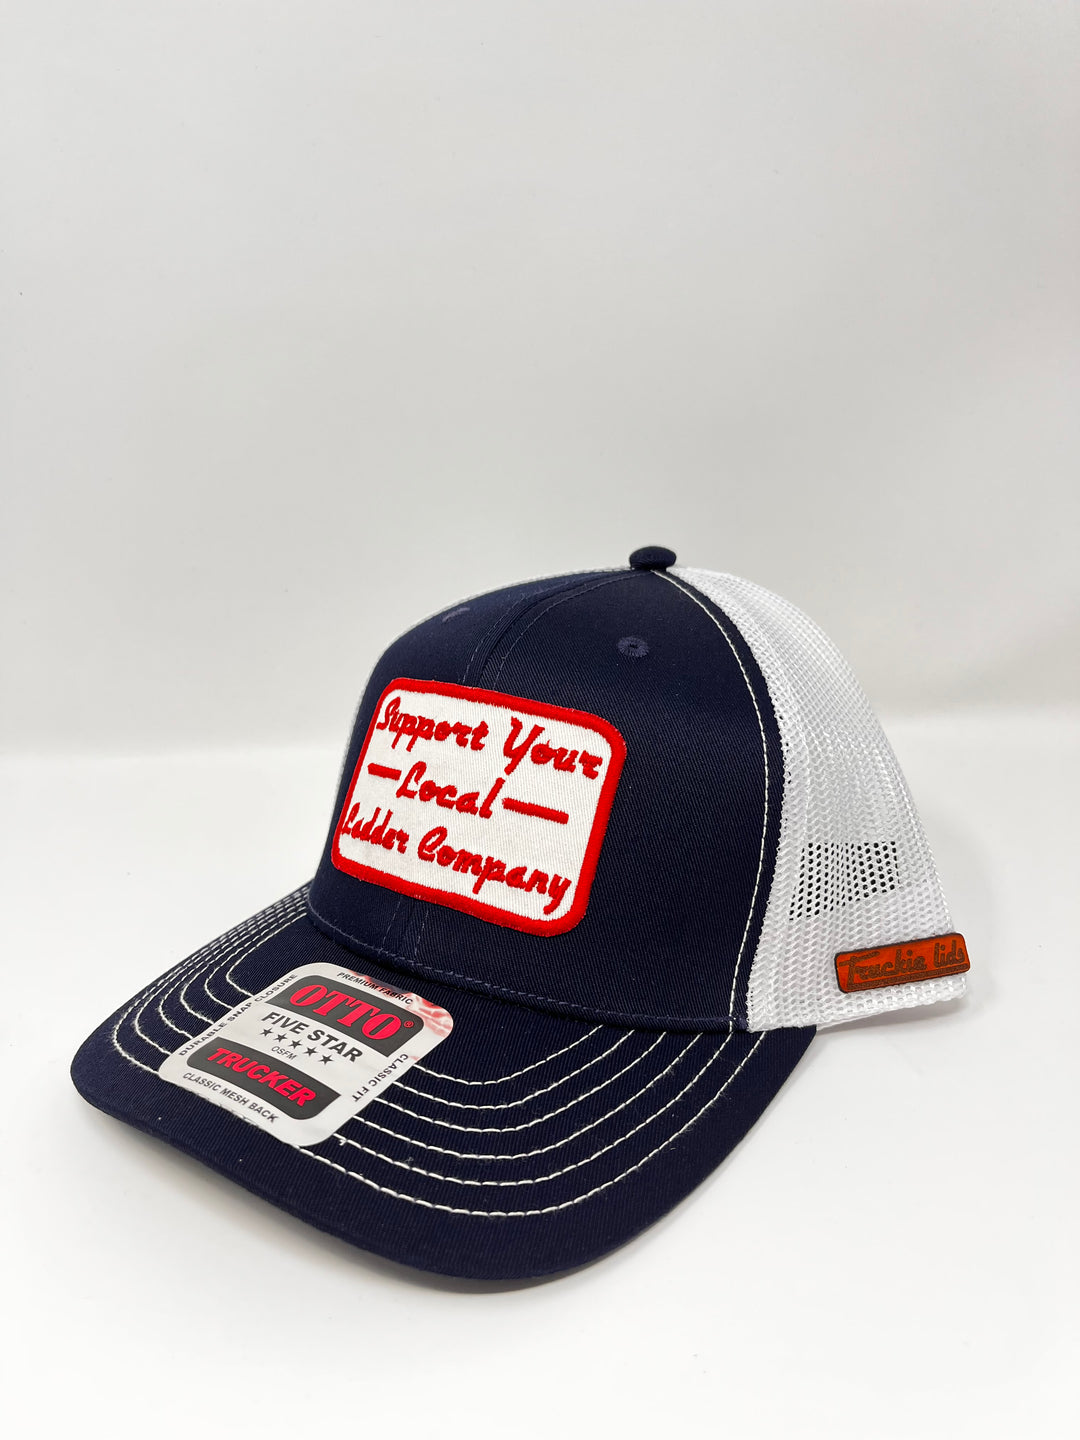 Custom Vintage "Support Your Local Company"